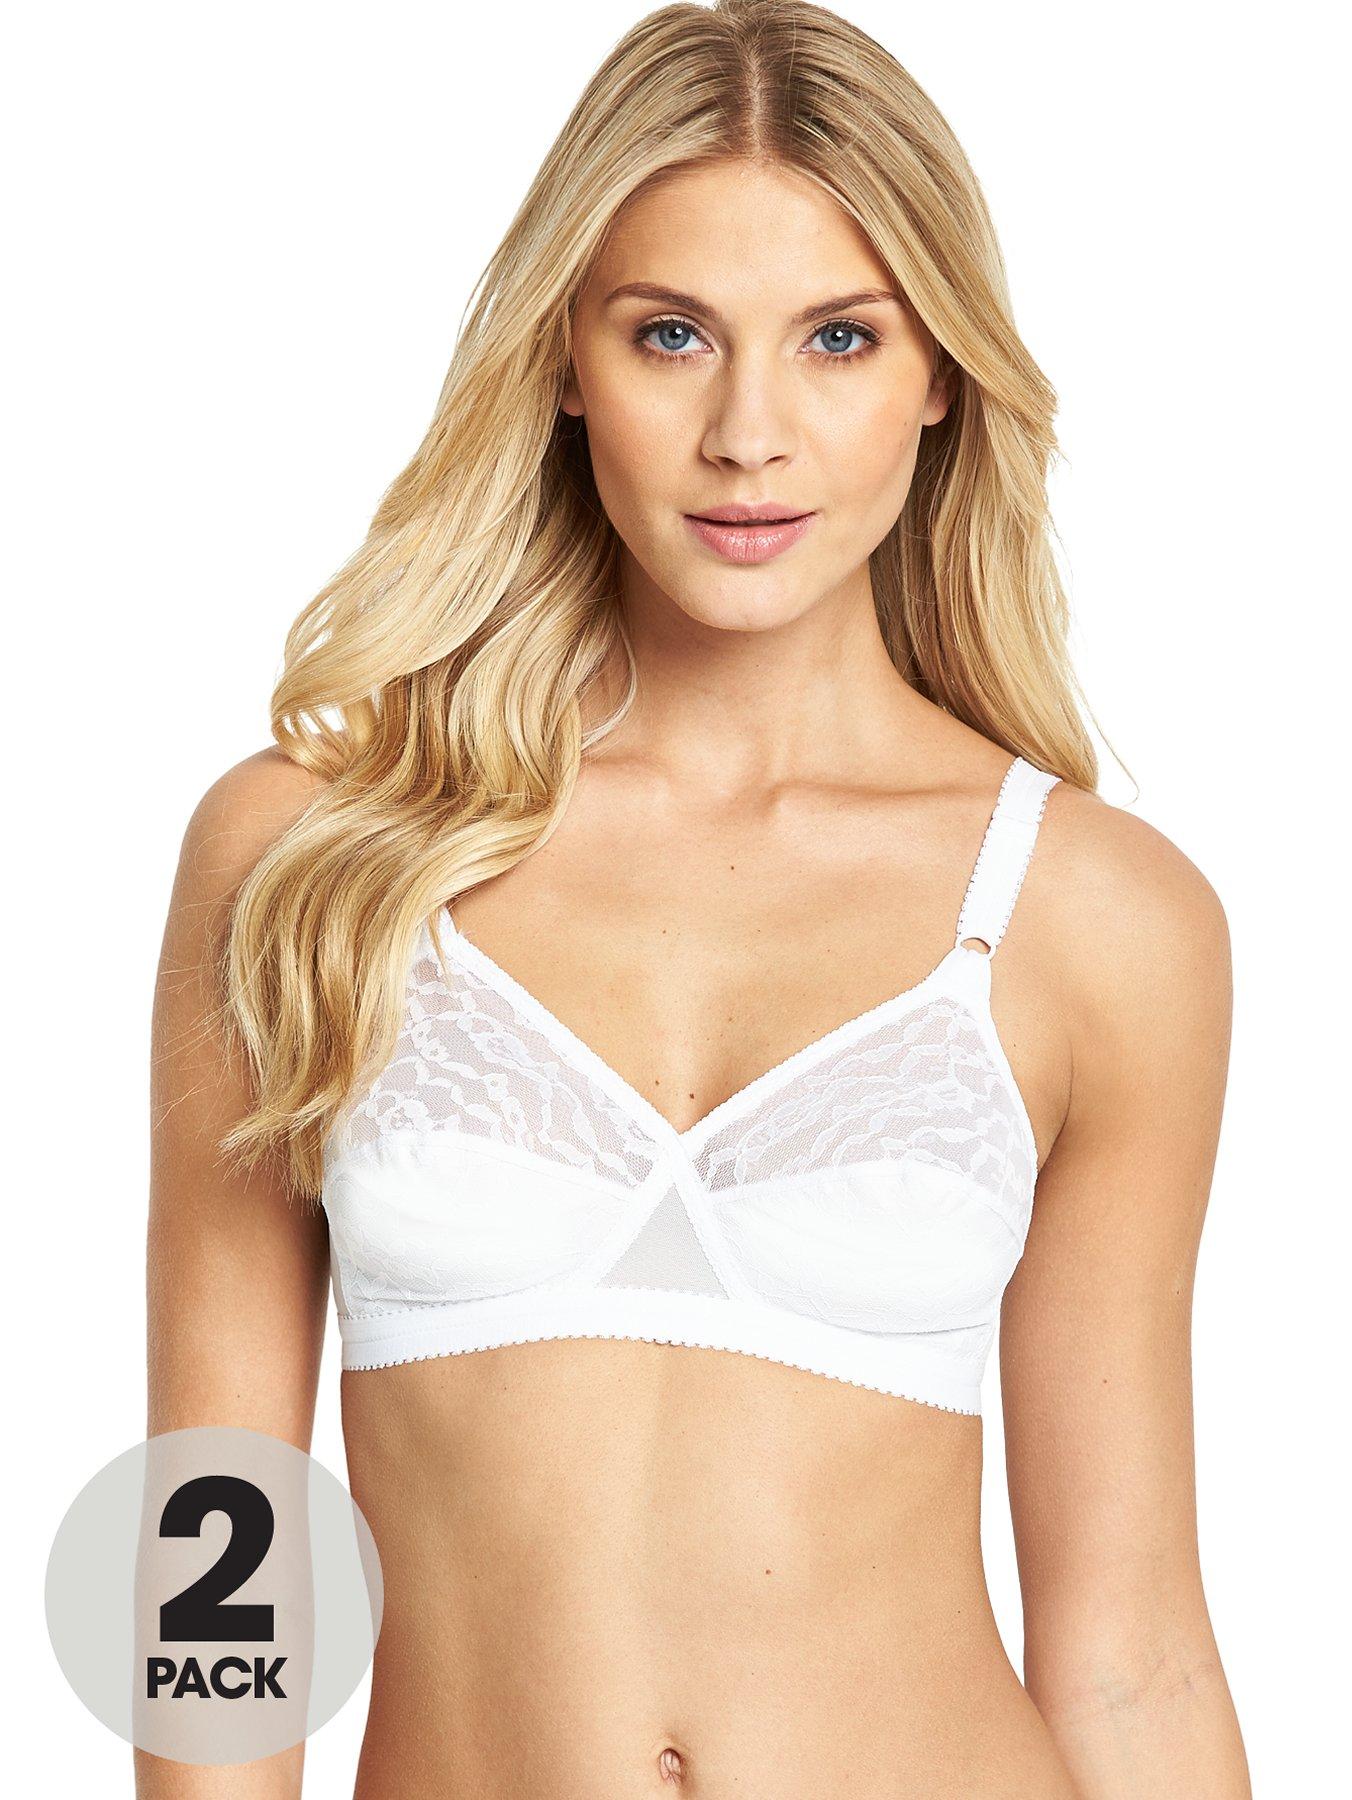 Playtex Cross Your Heart Soft Cup Bra Classic Support 152 White